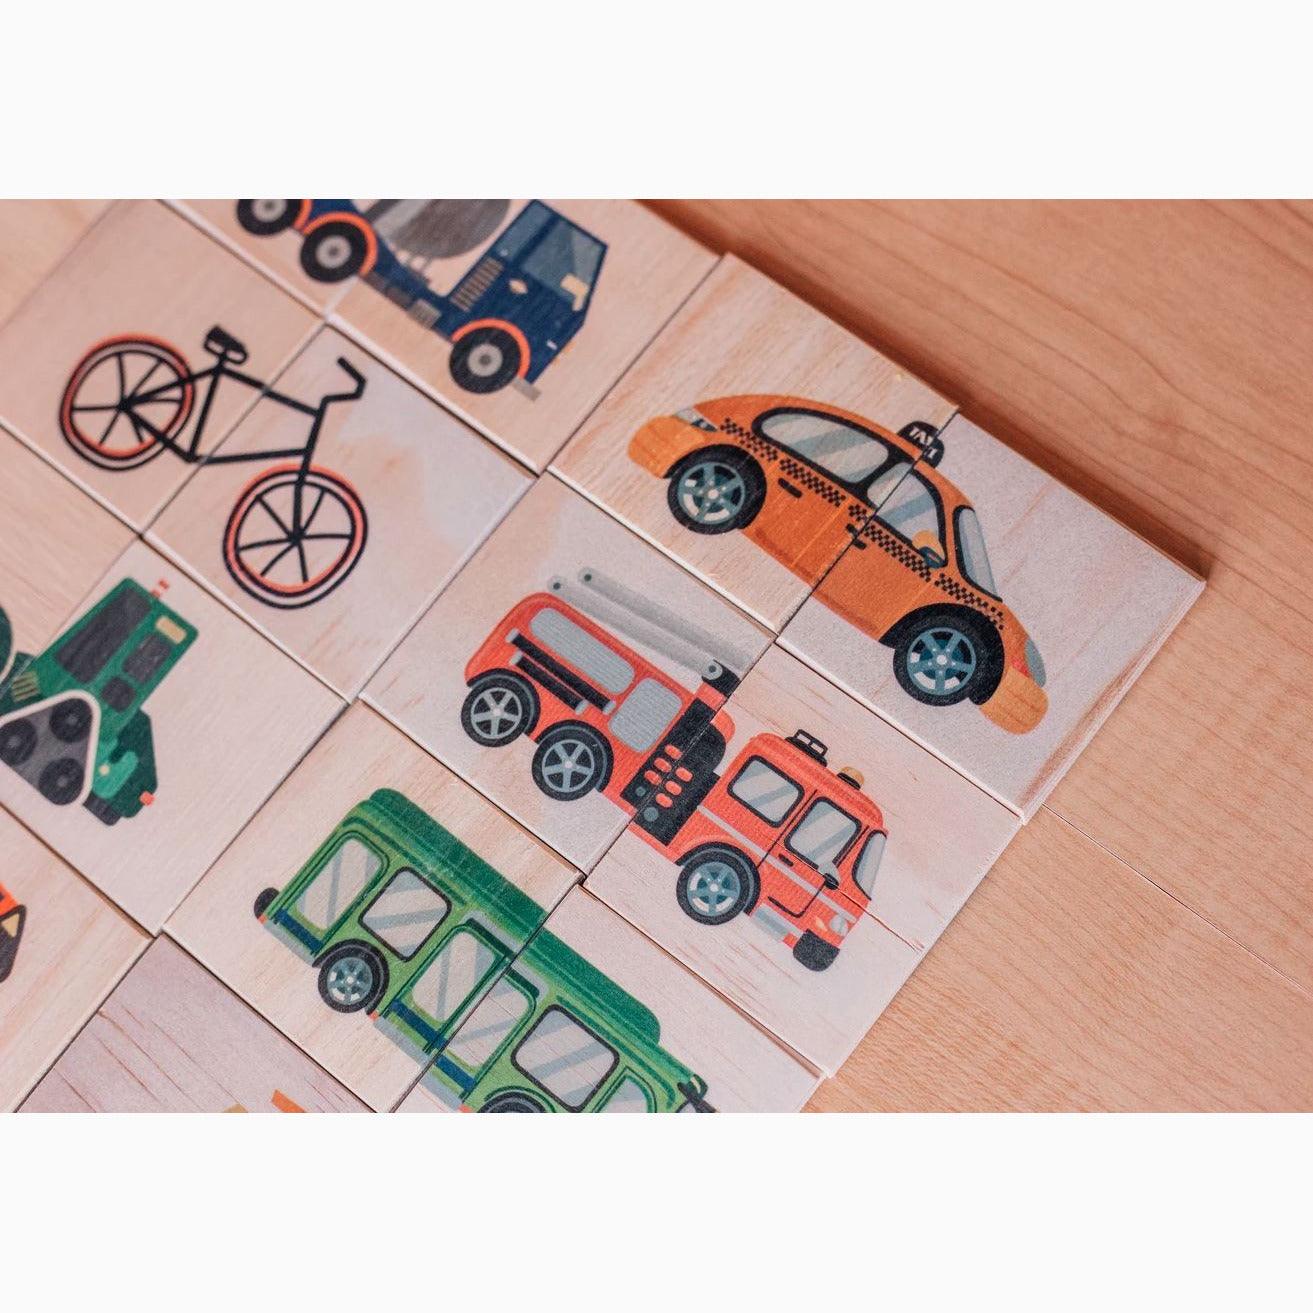 Workers and Wheels Double Sided Puzzle - Learn Grow Play